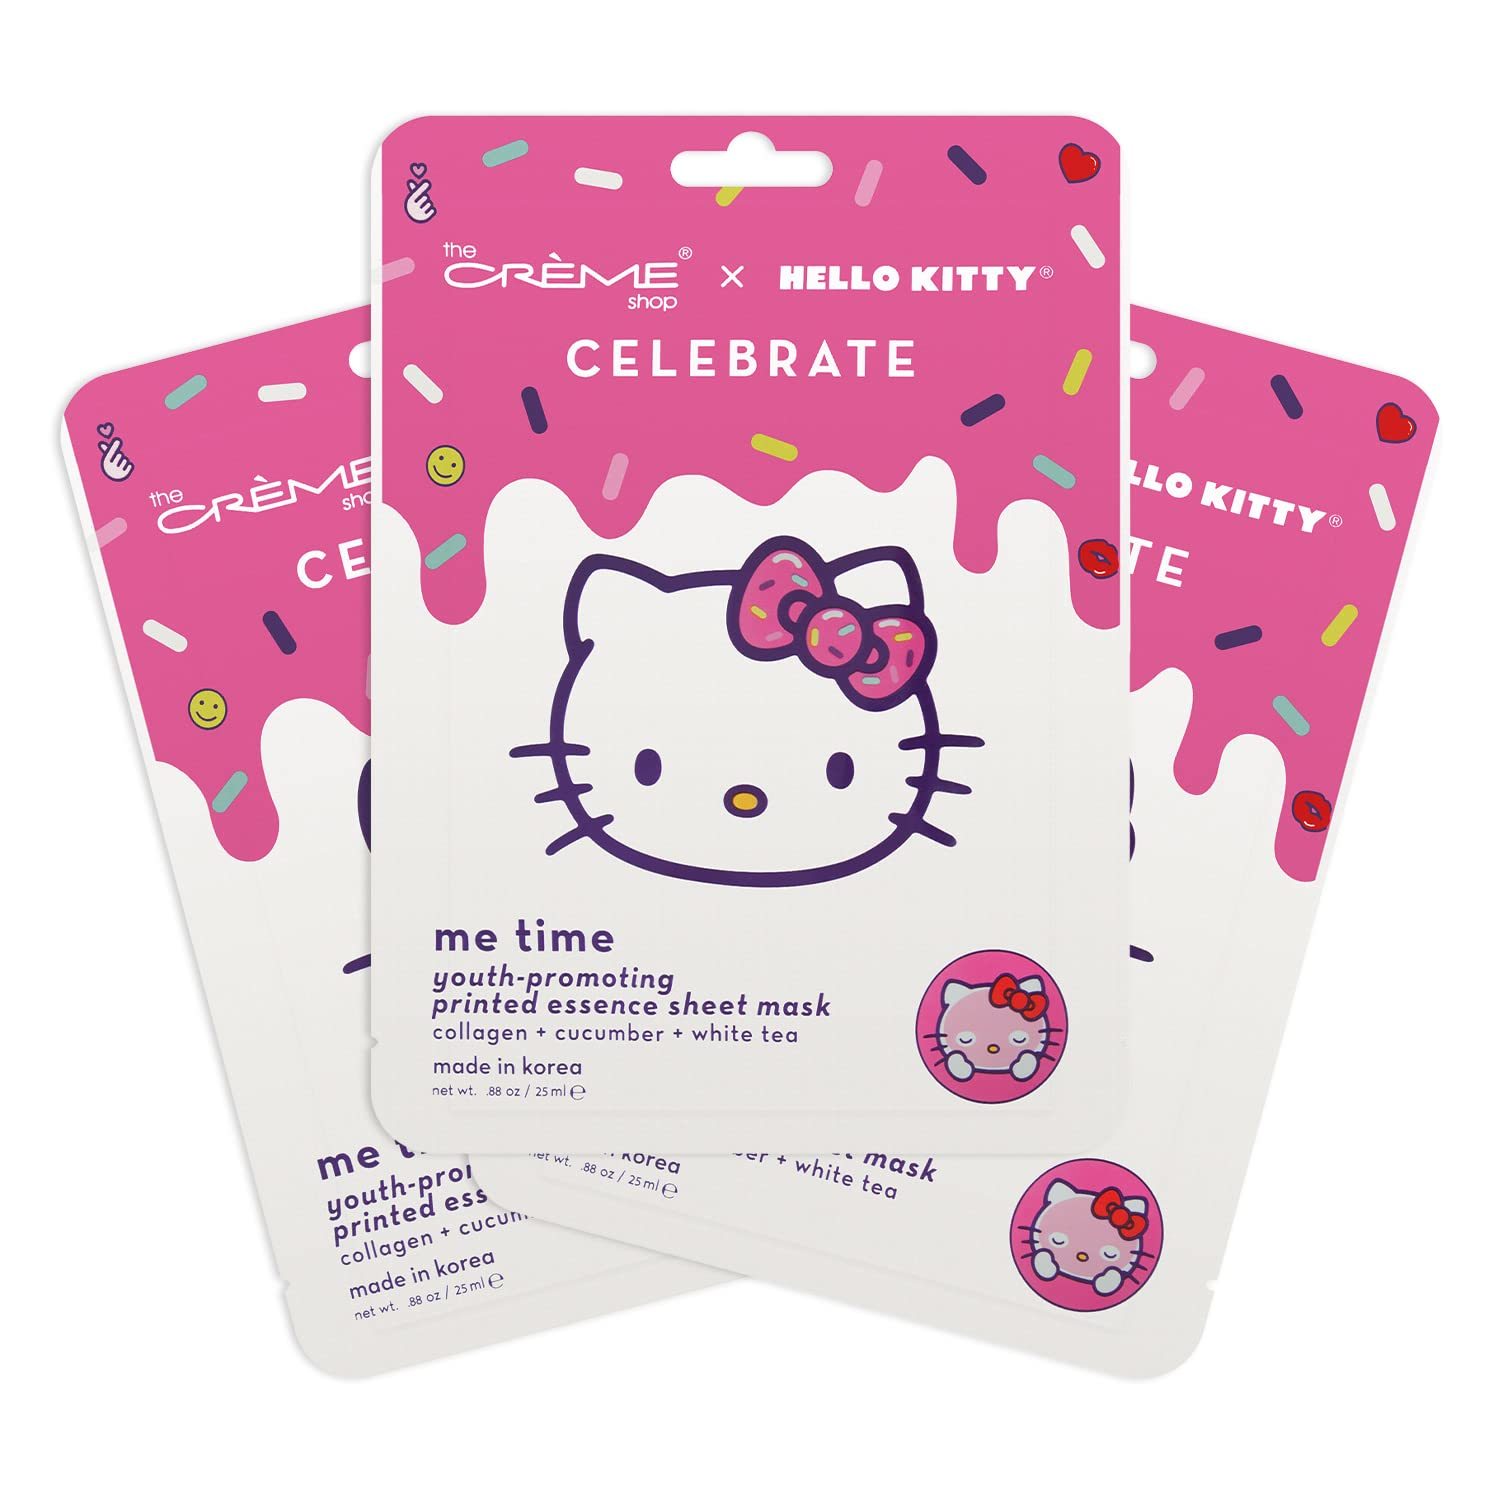 The Crme Shop | Hello Kitty CELEBRATE - Me Time! Youth-Promoting Sheet Mask (3  - $23.99